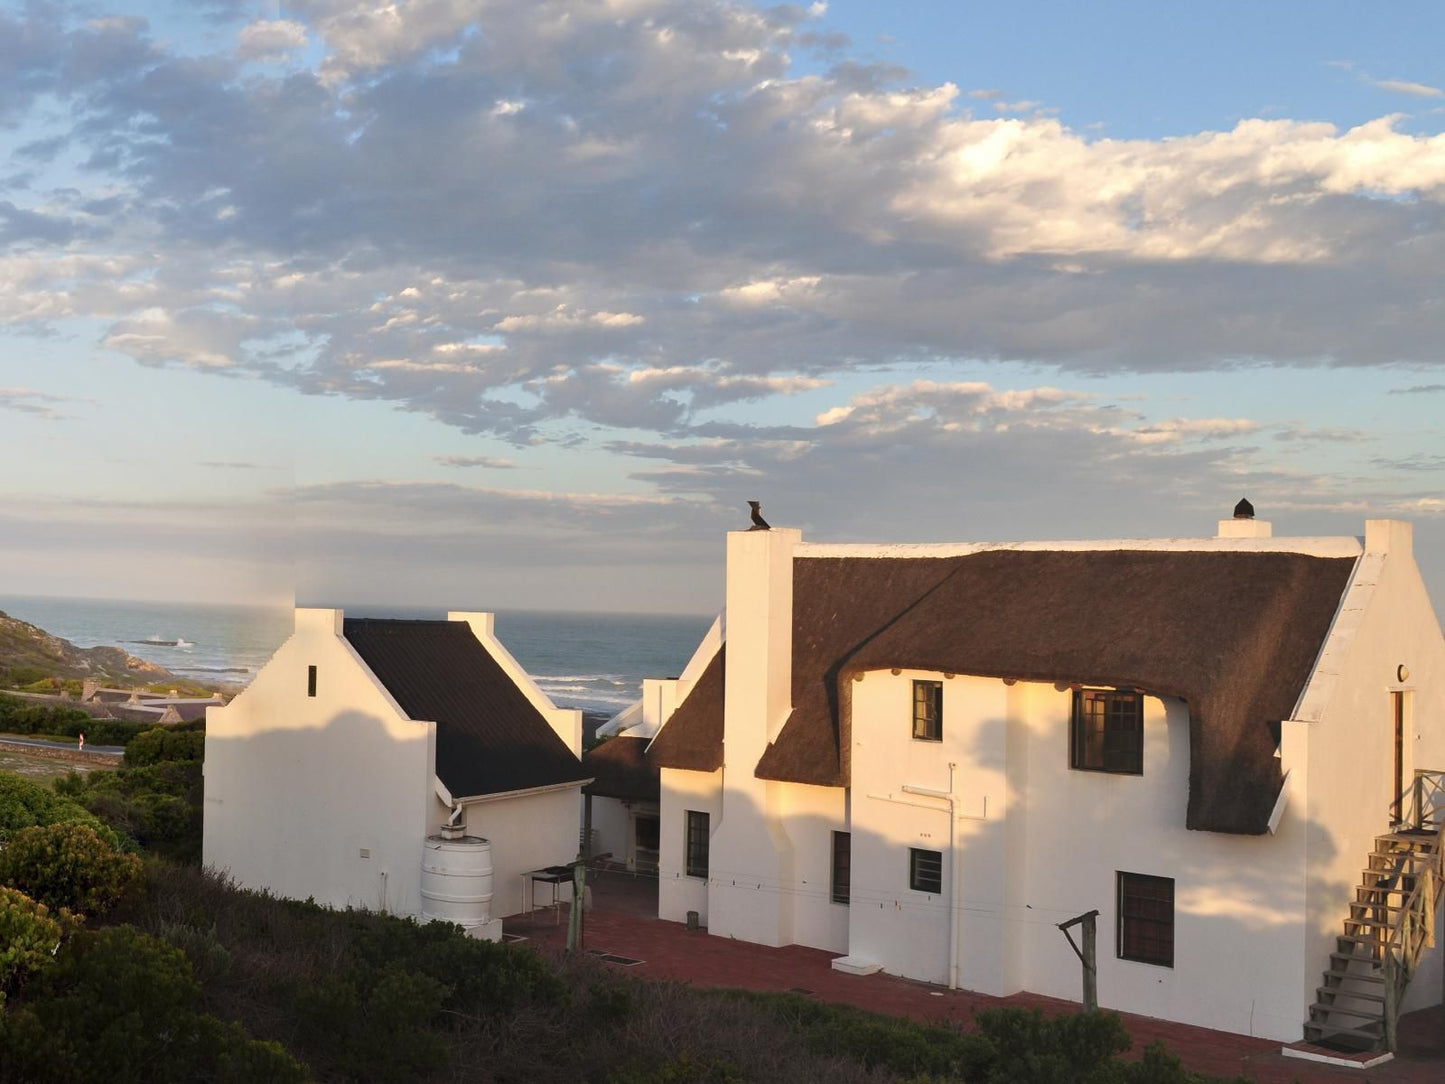 Arniston Seaside Cottages Arniston Western Cape South Africa Building, Architecture